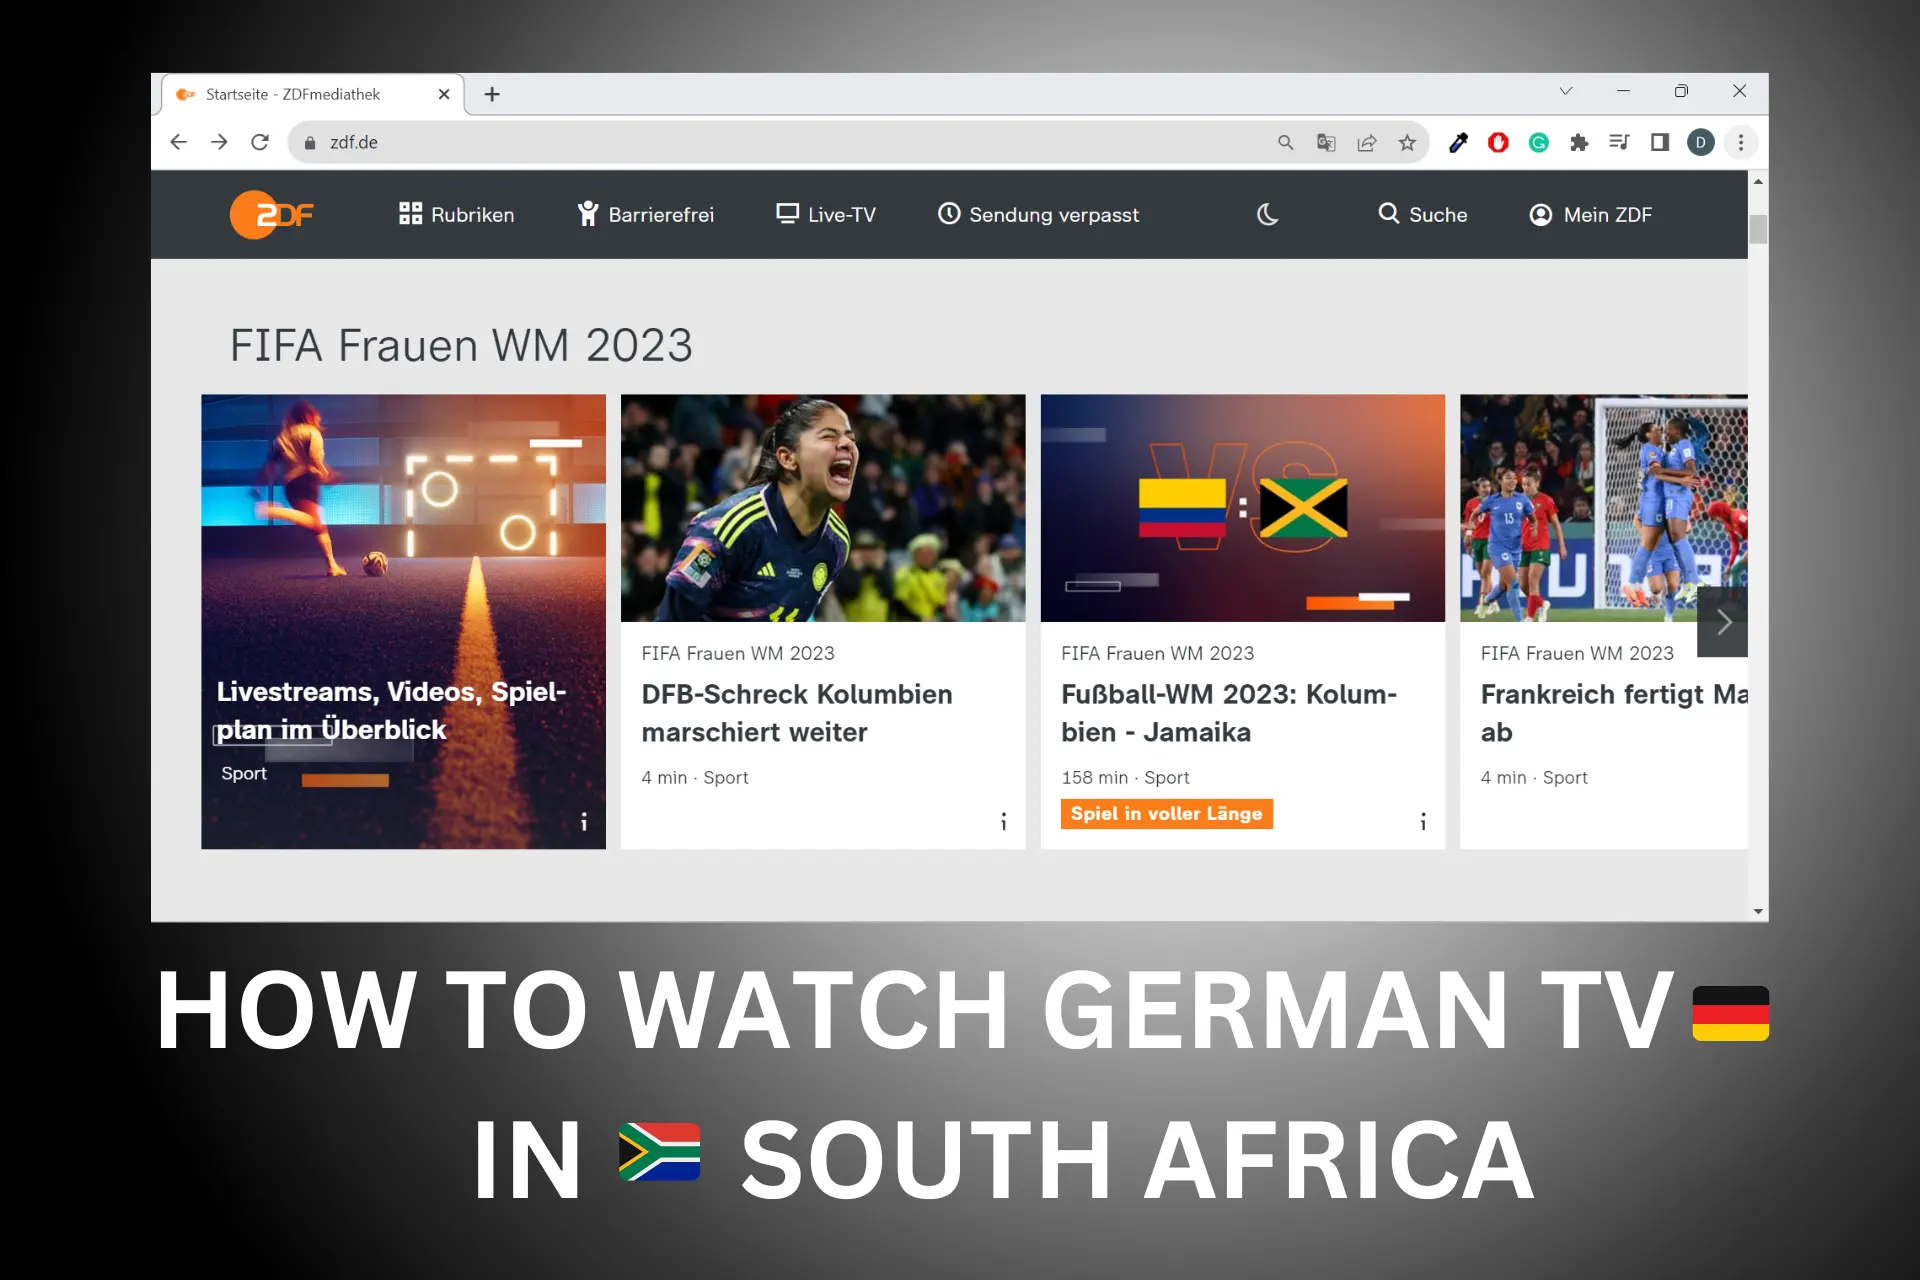 HOW TO WATCH GERMAN TV IN SOUTH AFRICA